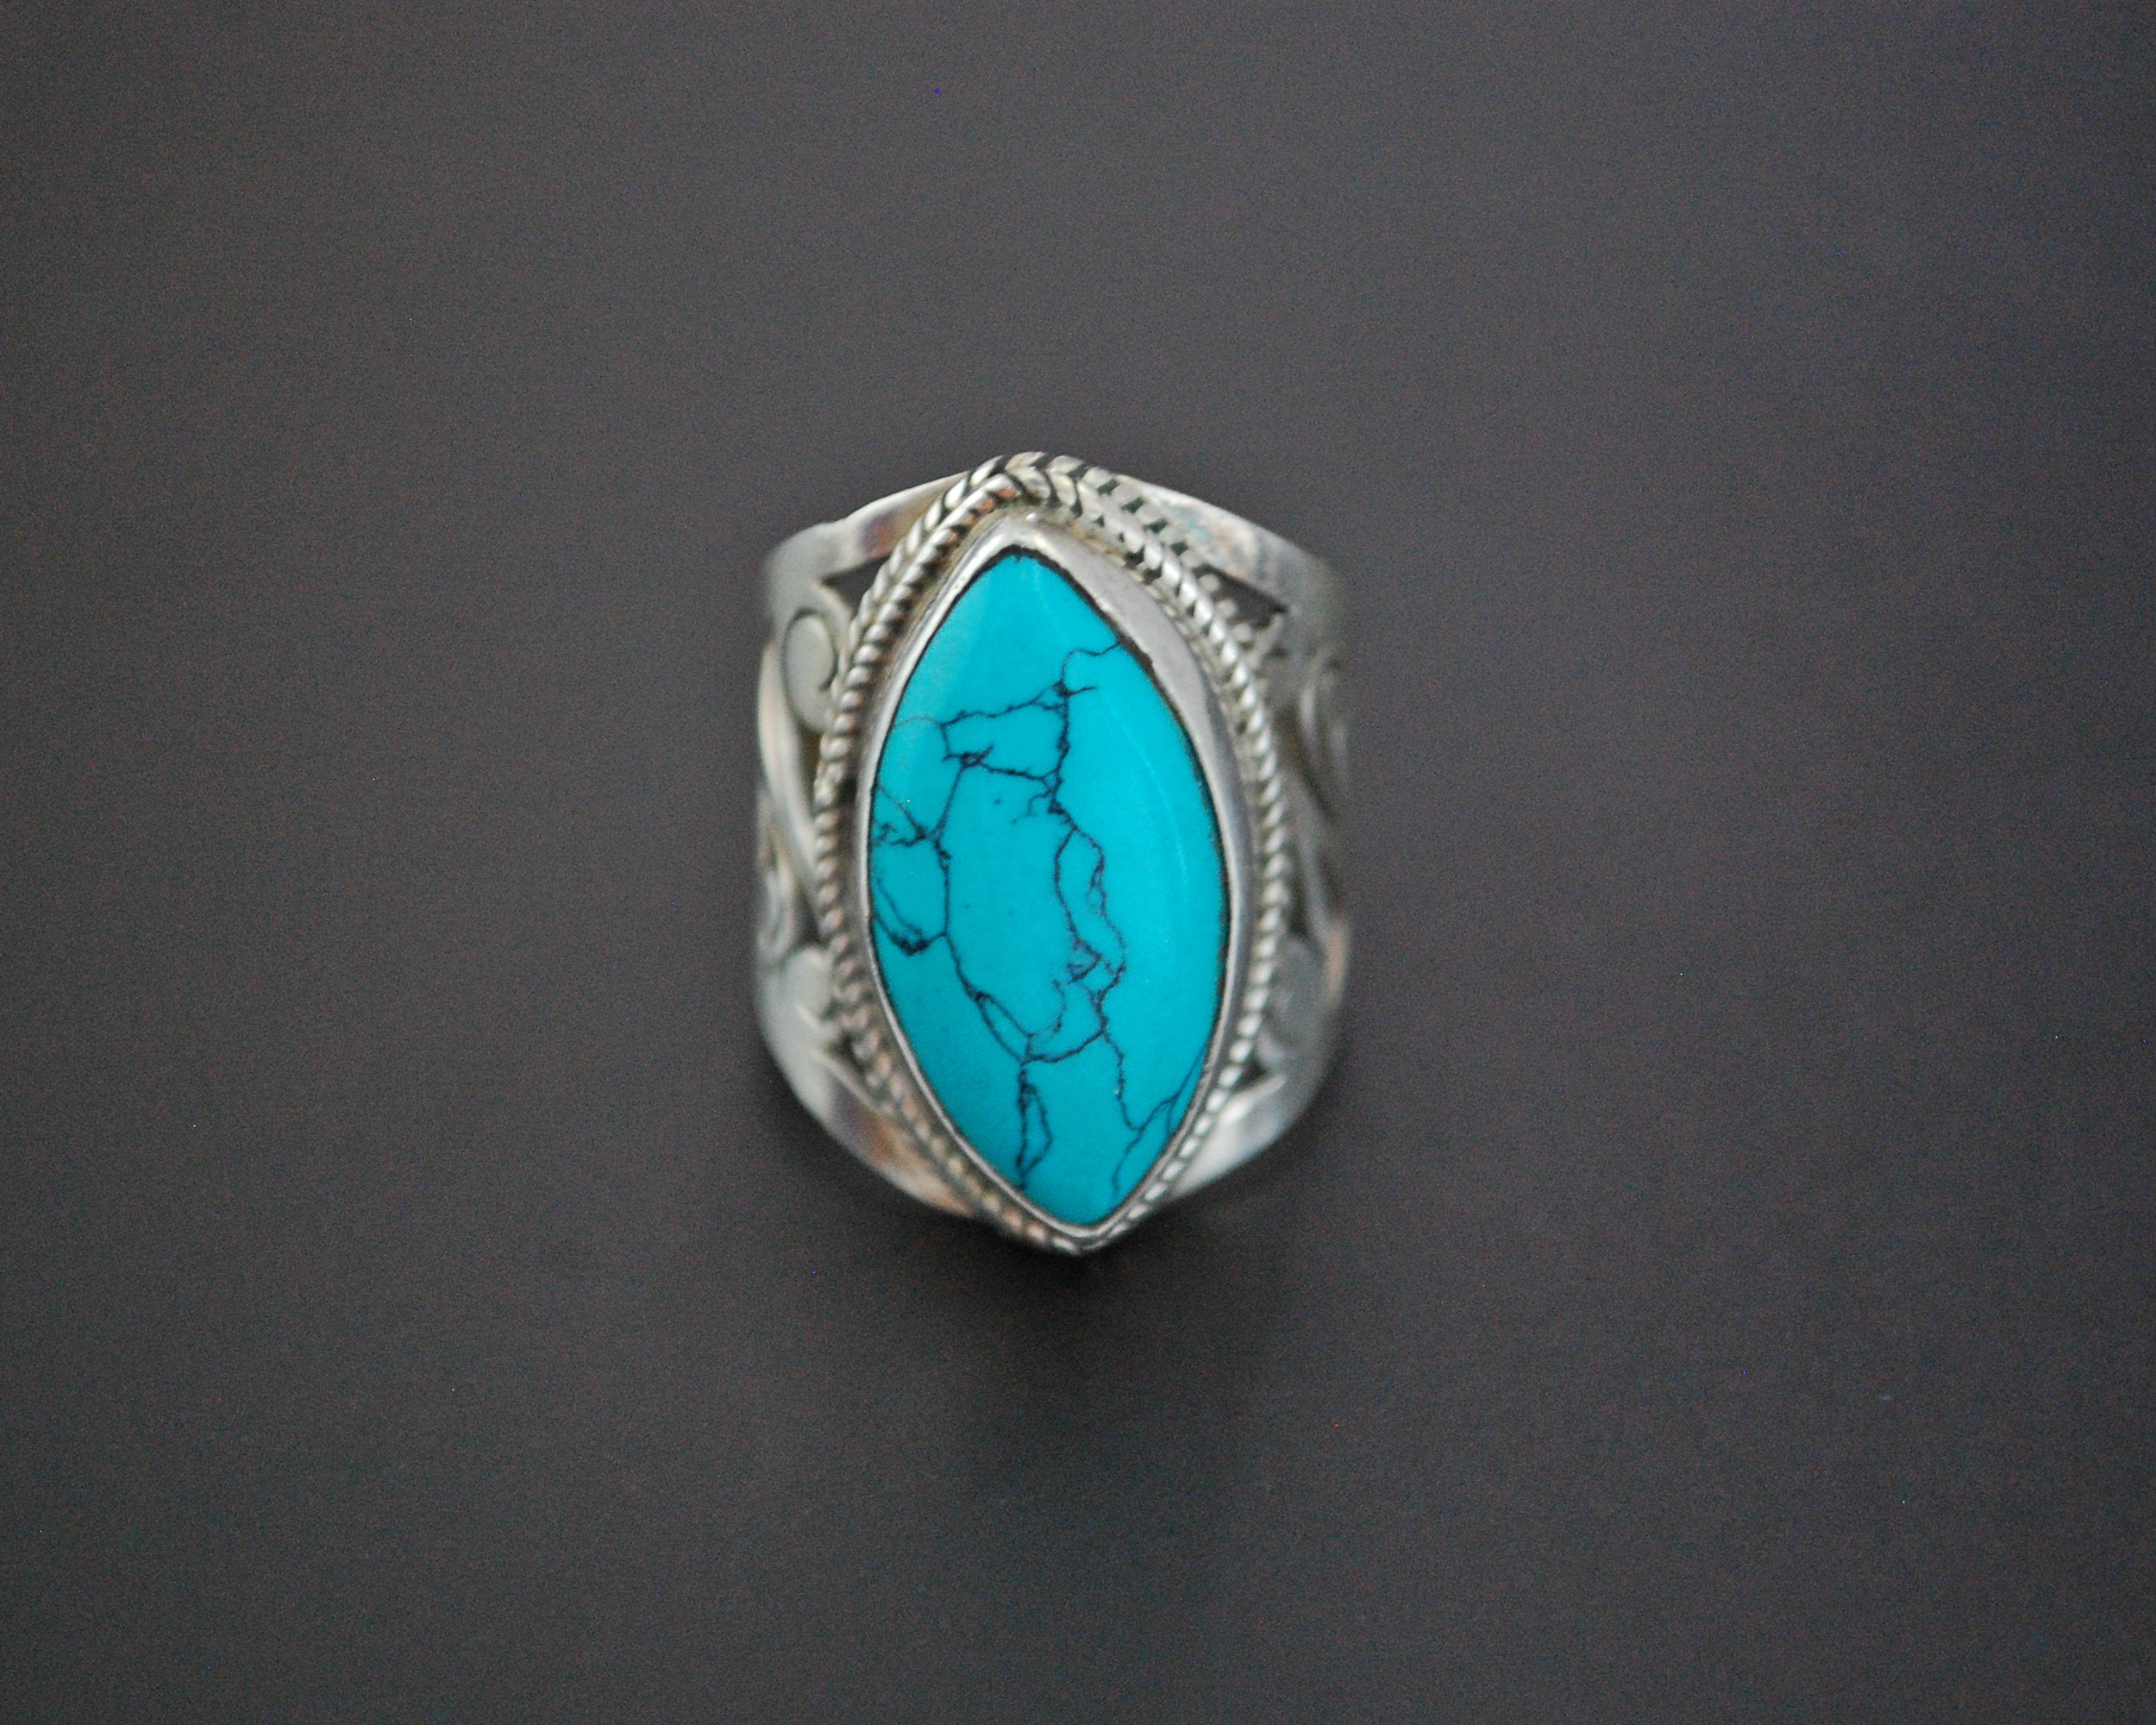 Ethnic Turquoise Ring with Openwork - Size 6